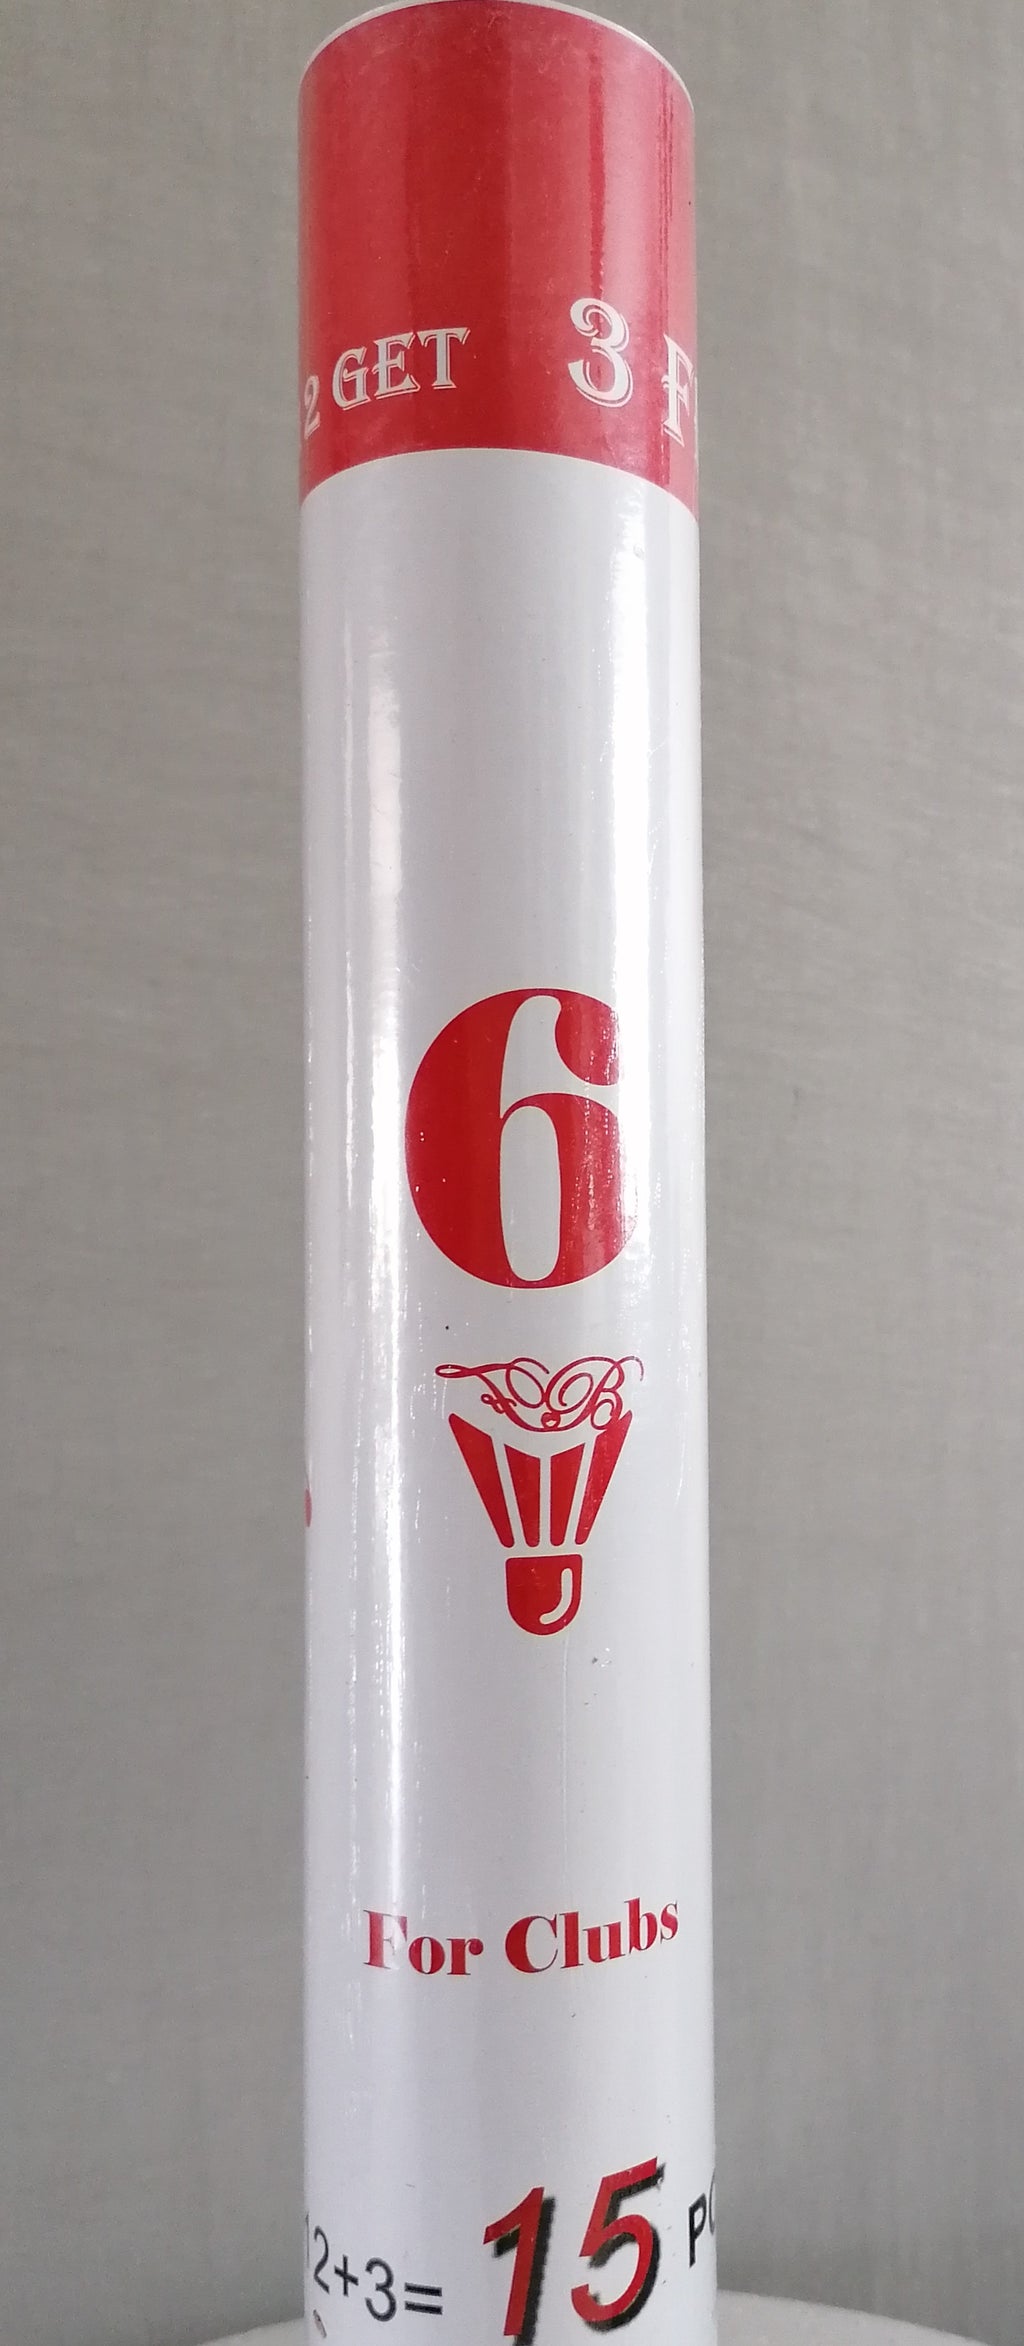 Goose feather shuttlecock speed 78 ideal for clubs only £13.99 for 15 - badminton racket review